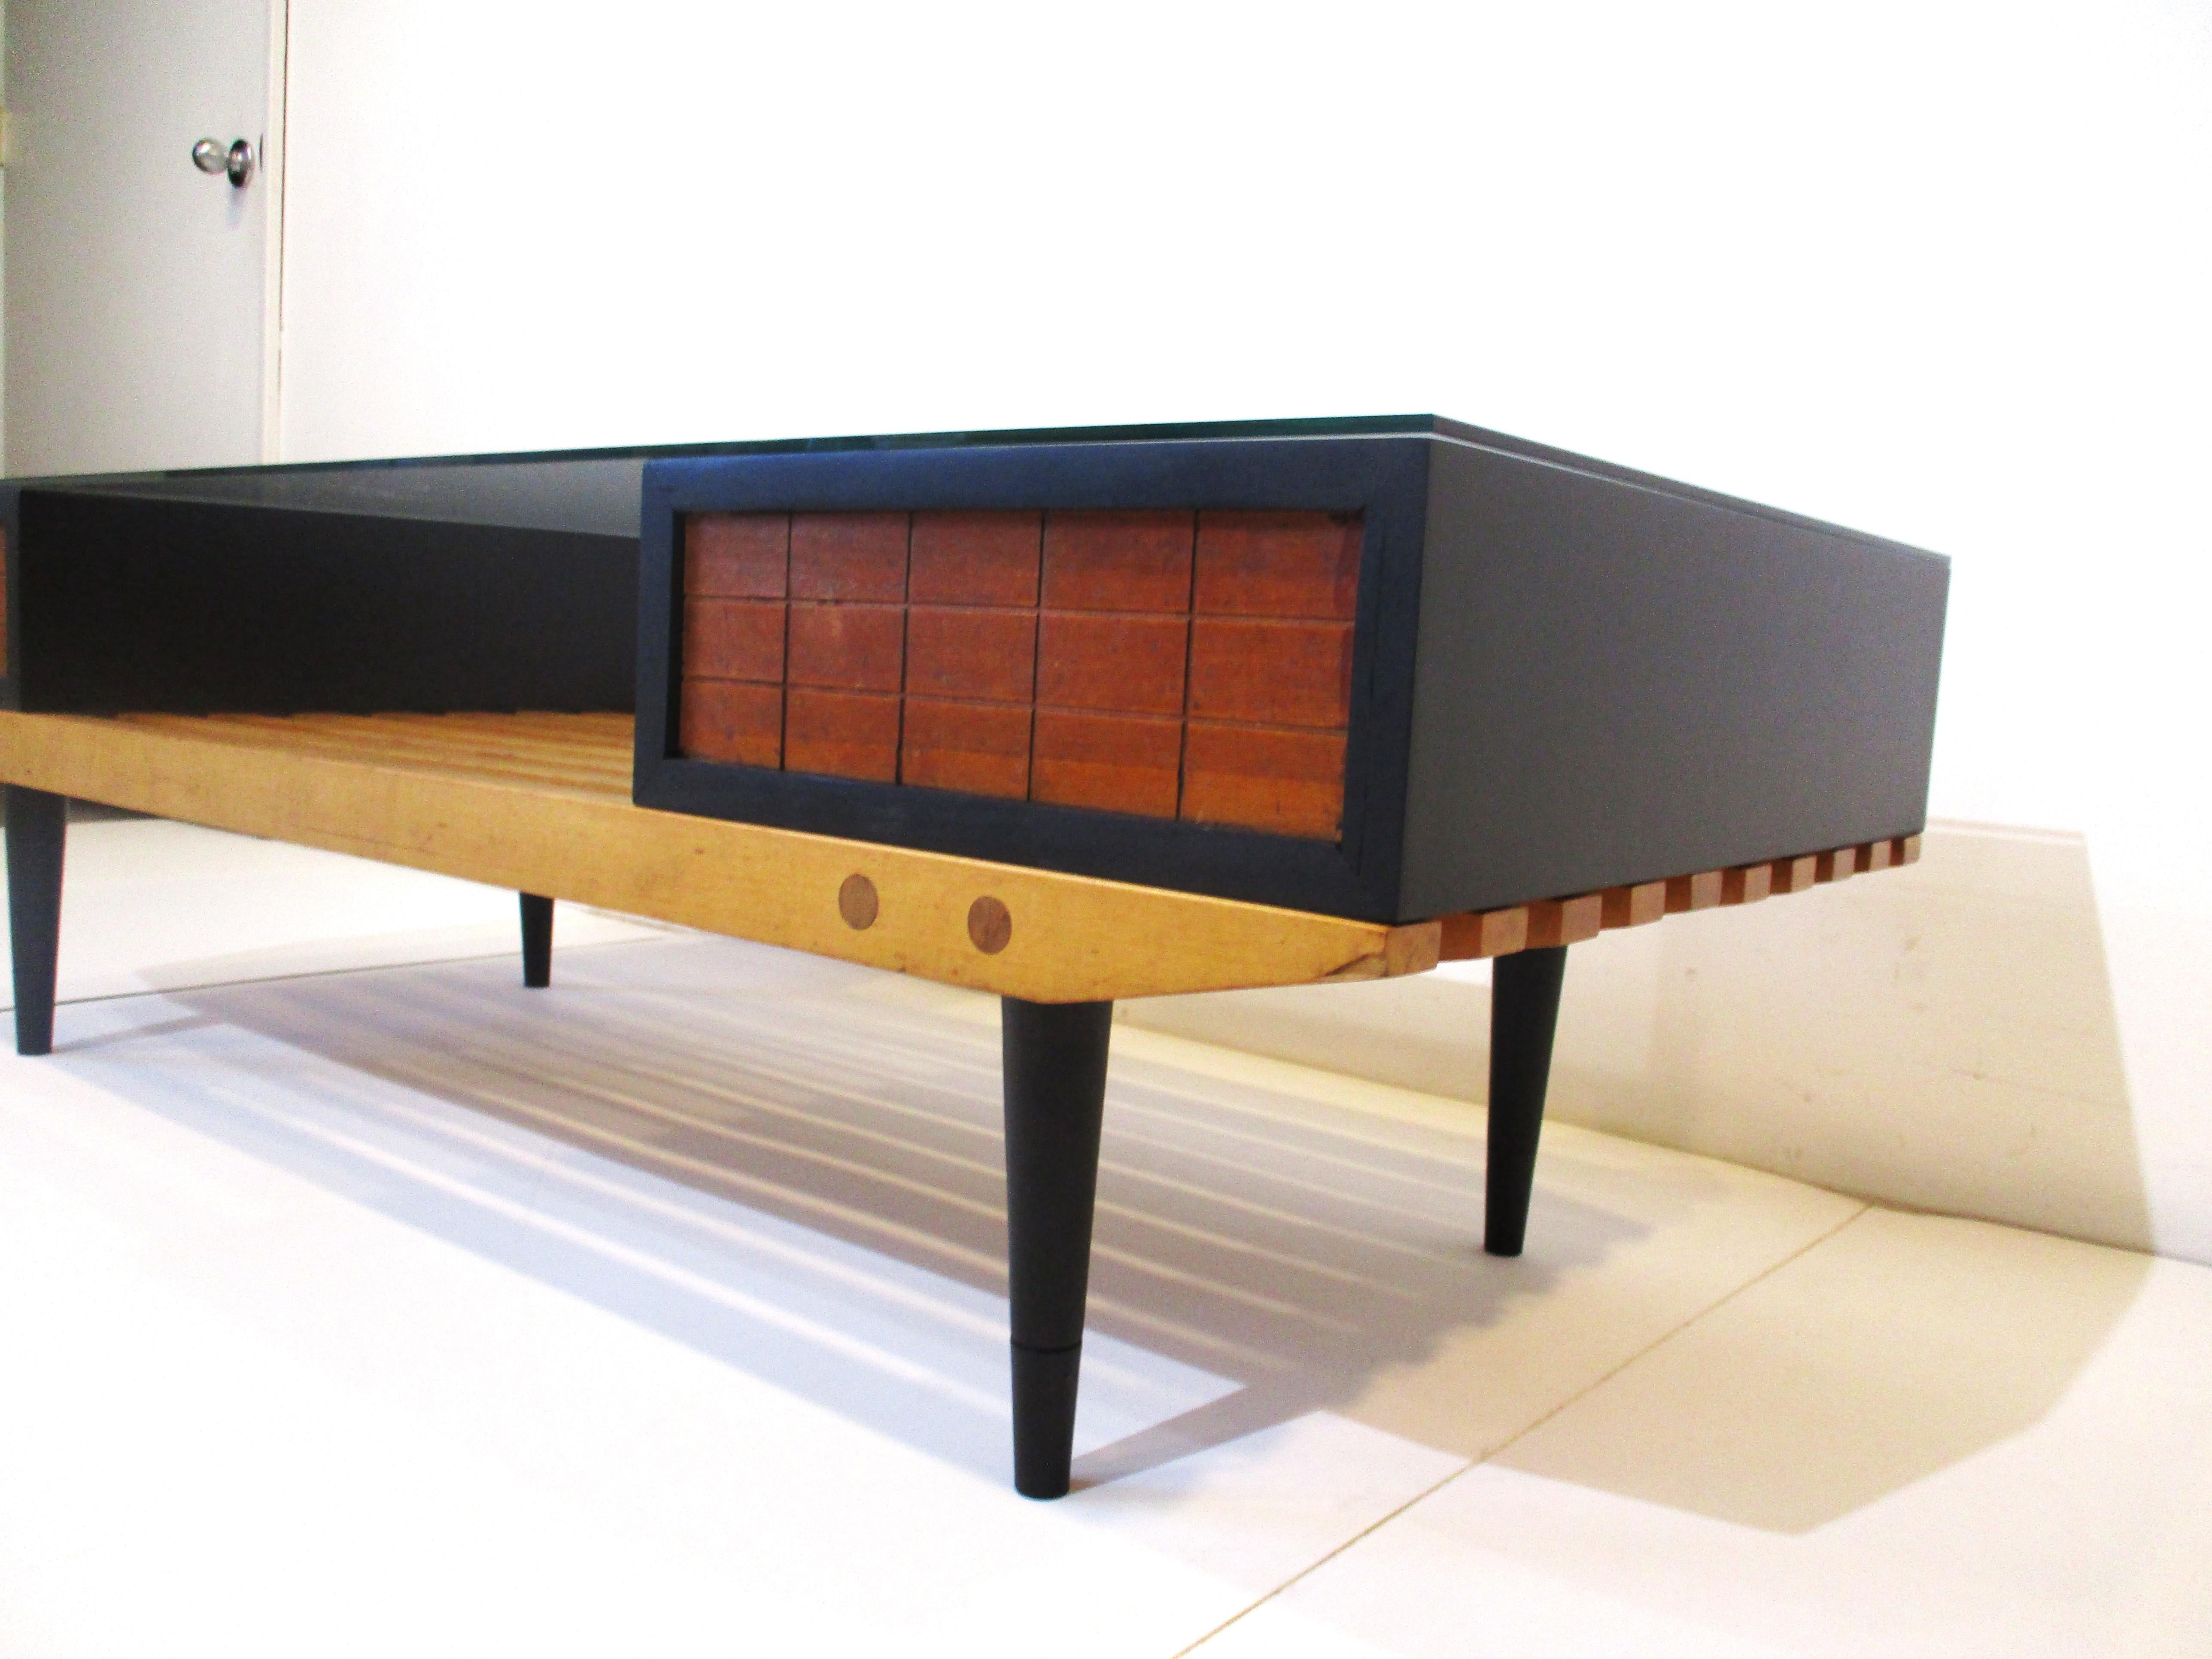 20th Century Slat Wood / Glass Coffee Table in the Style of Nelson, Herman Miller For Sale